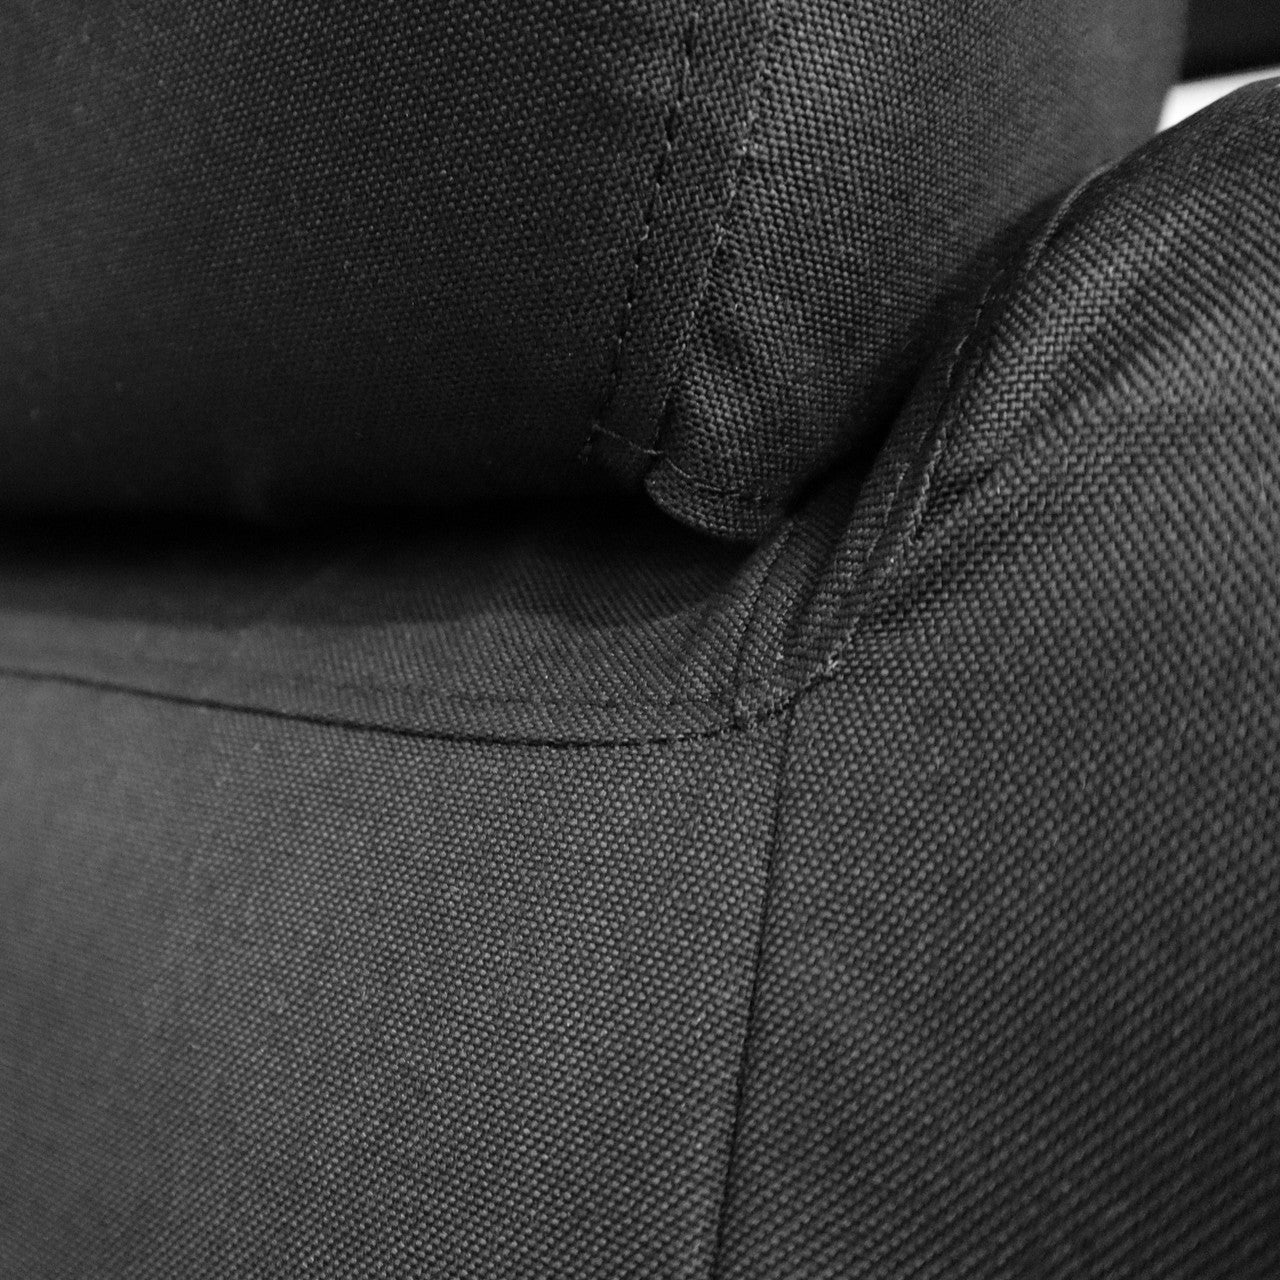 TigerTough Seat Covers - Toyota Tundra Stitching and Seams Detail